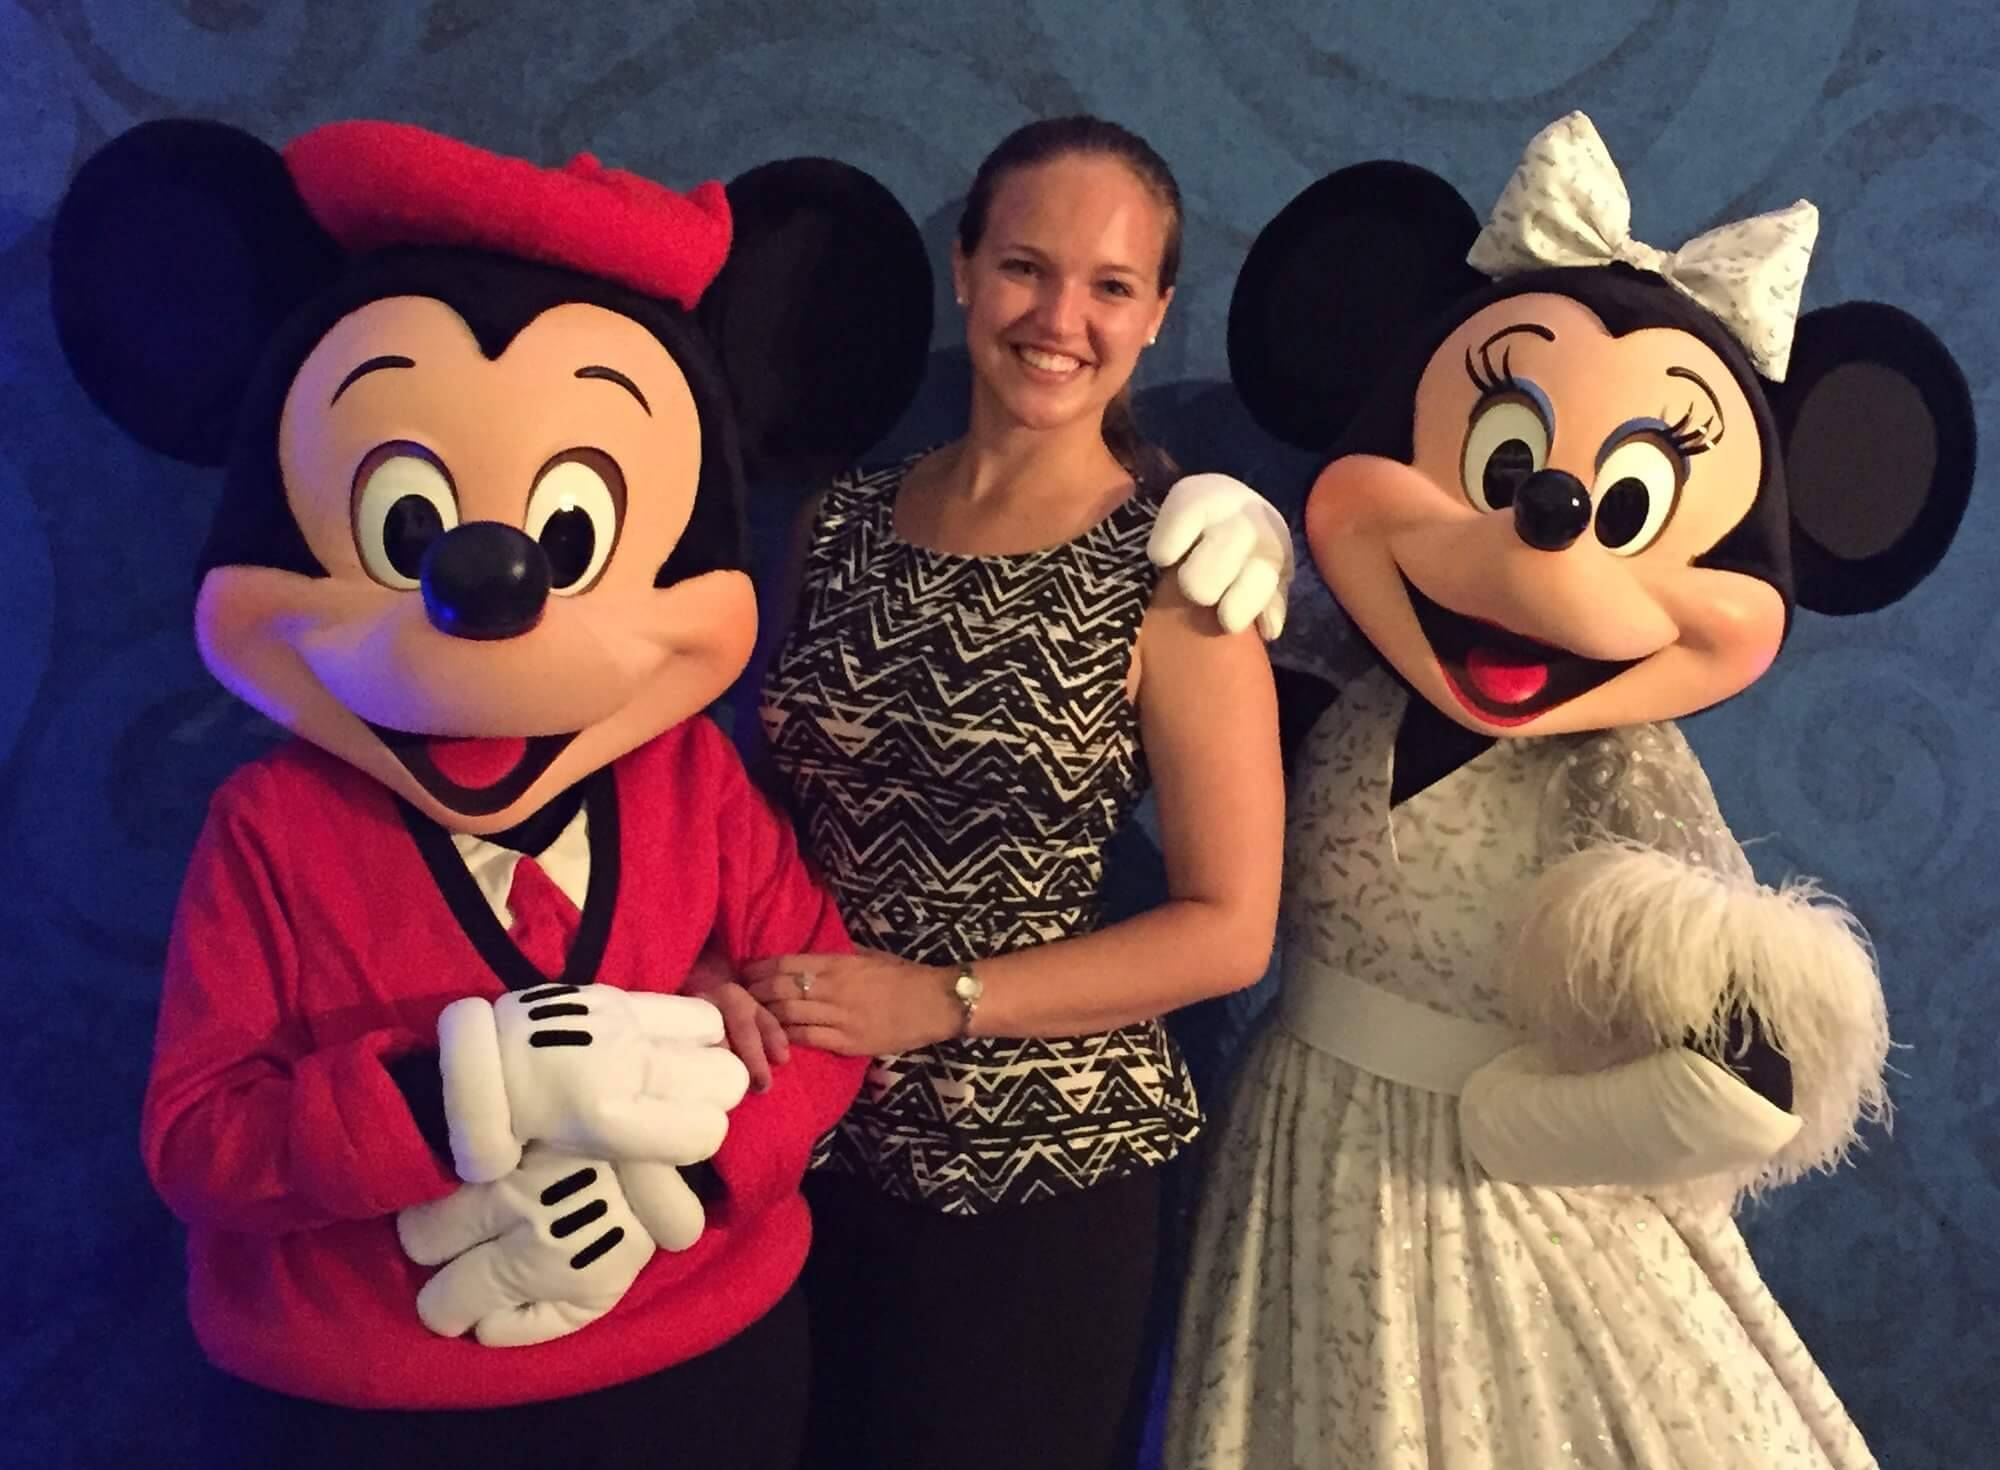 Elizabeth Stolz posing with Mickey and Minnie mouse